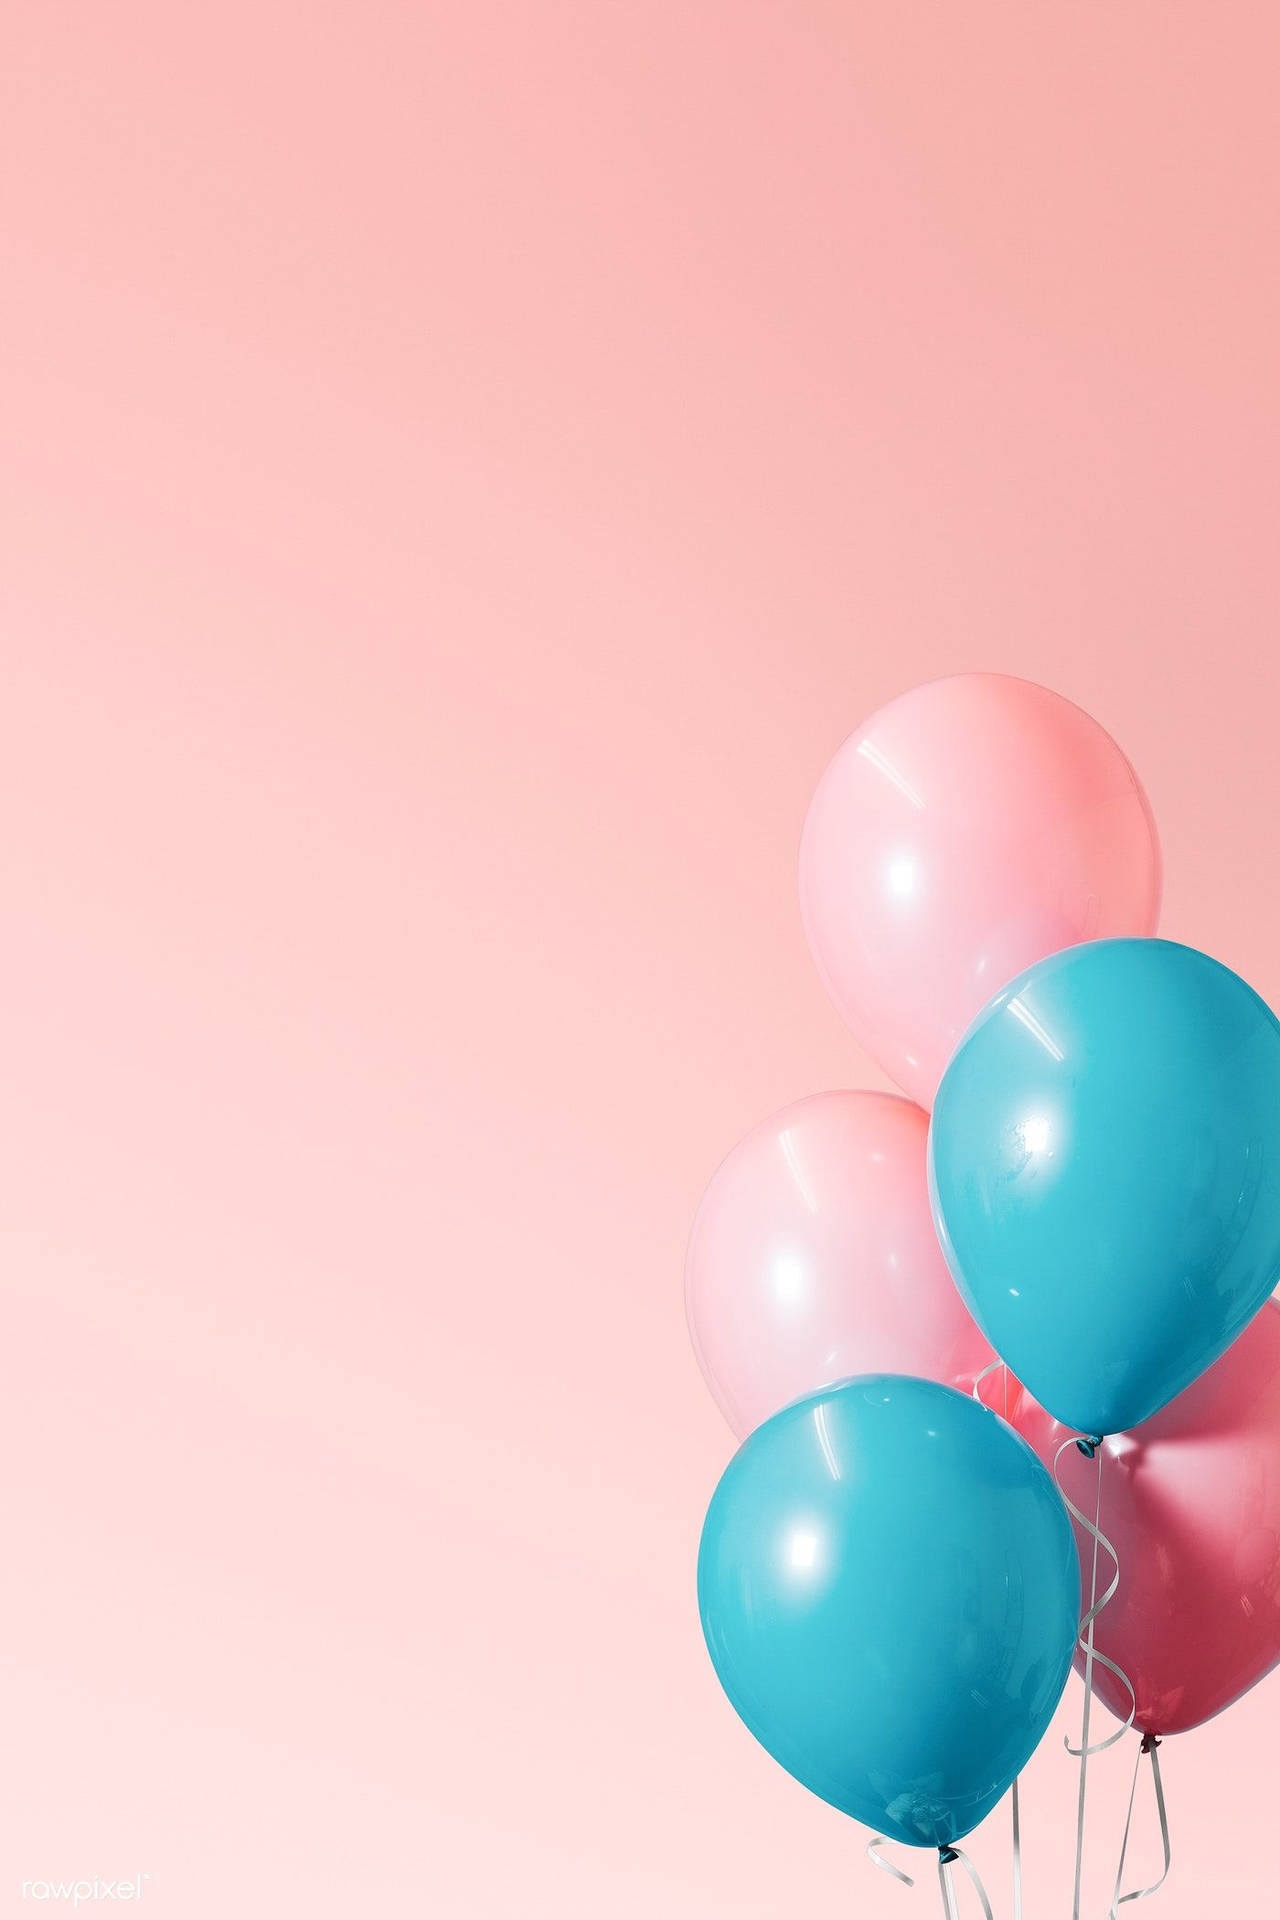 Aesthetic Happy Birthday Pink And Blue Balloons Wallpaper